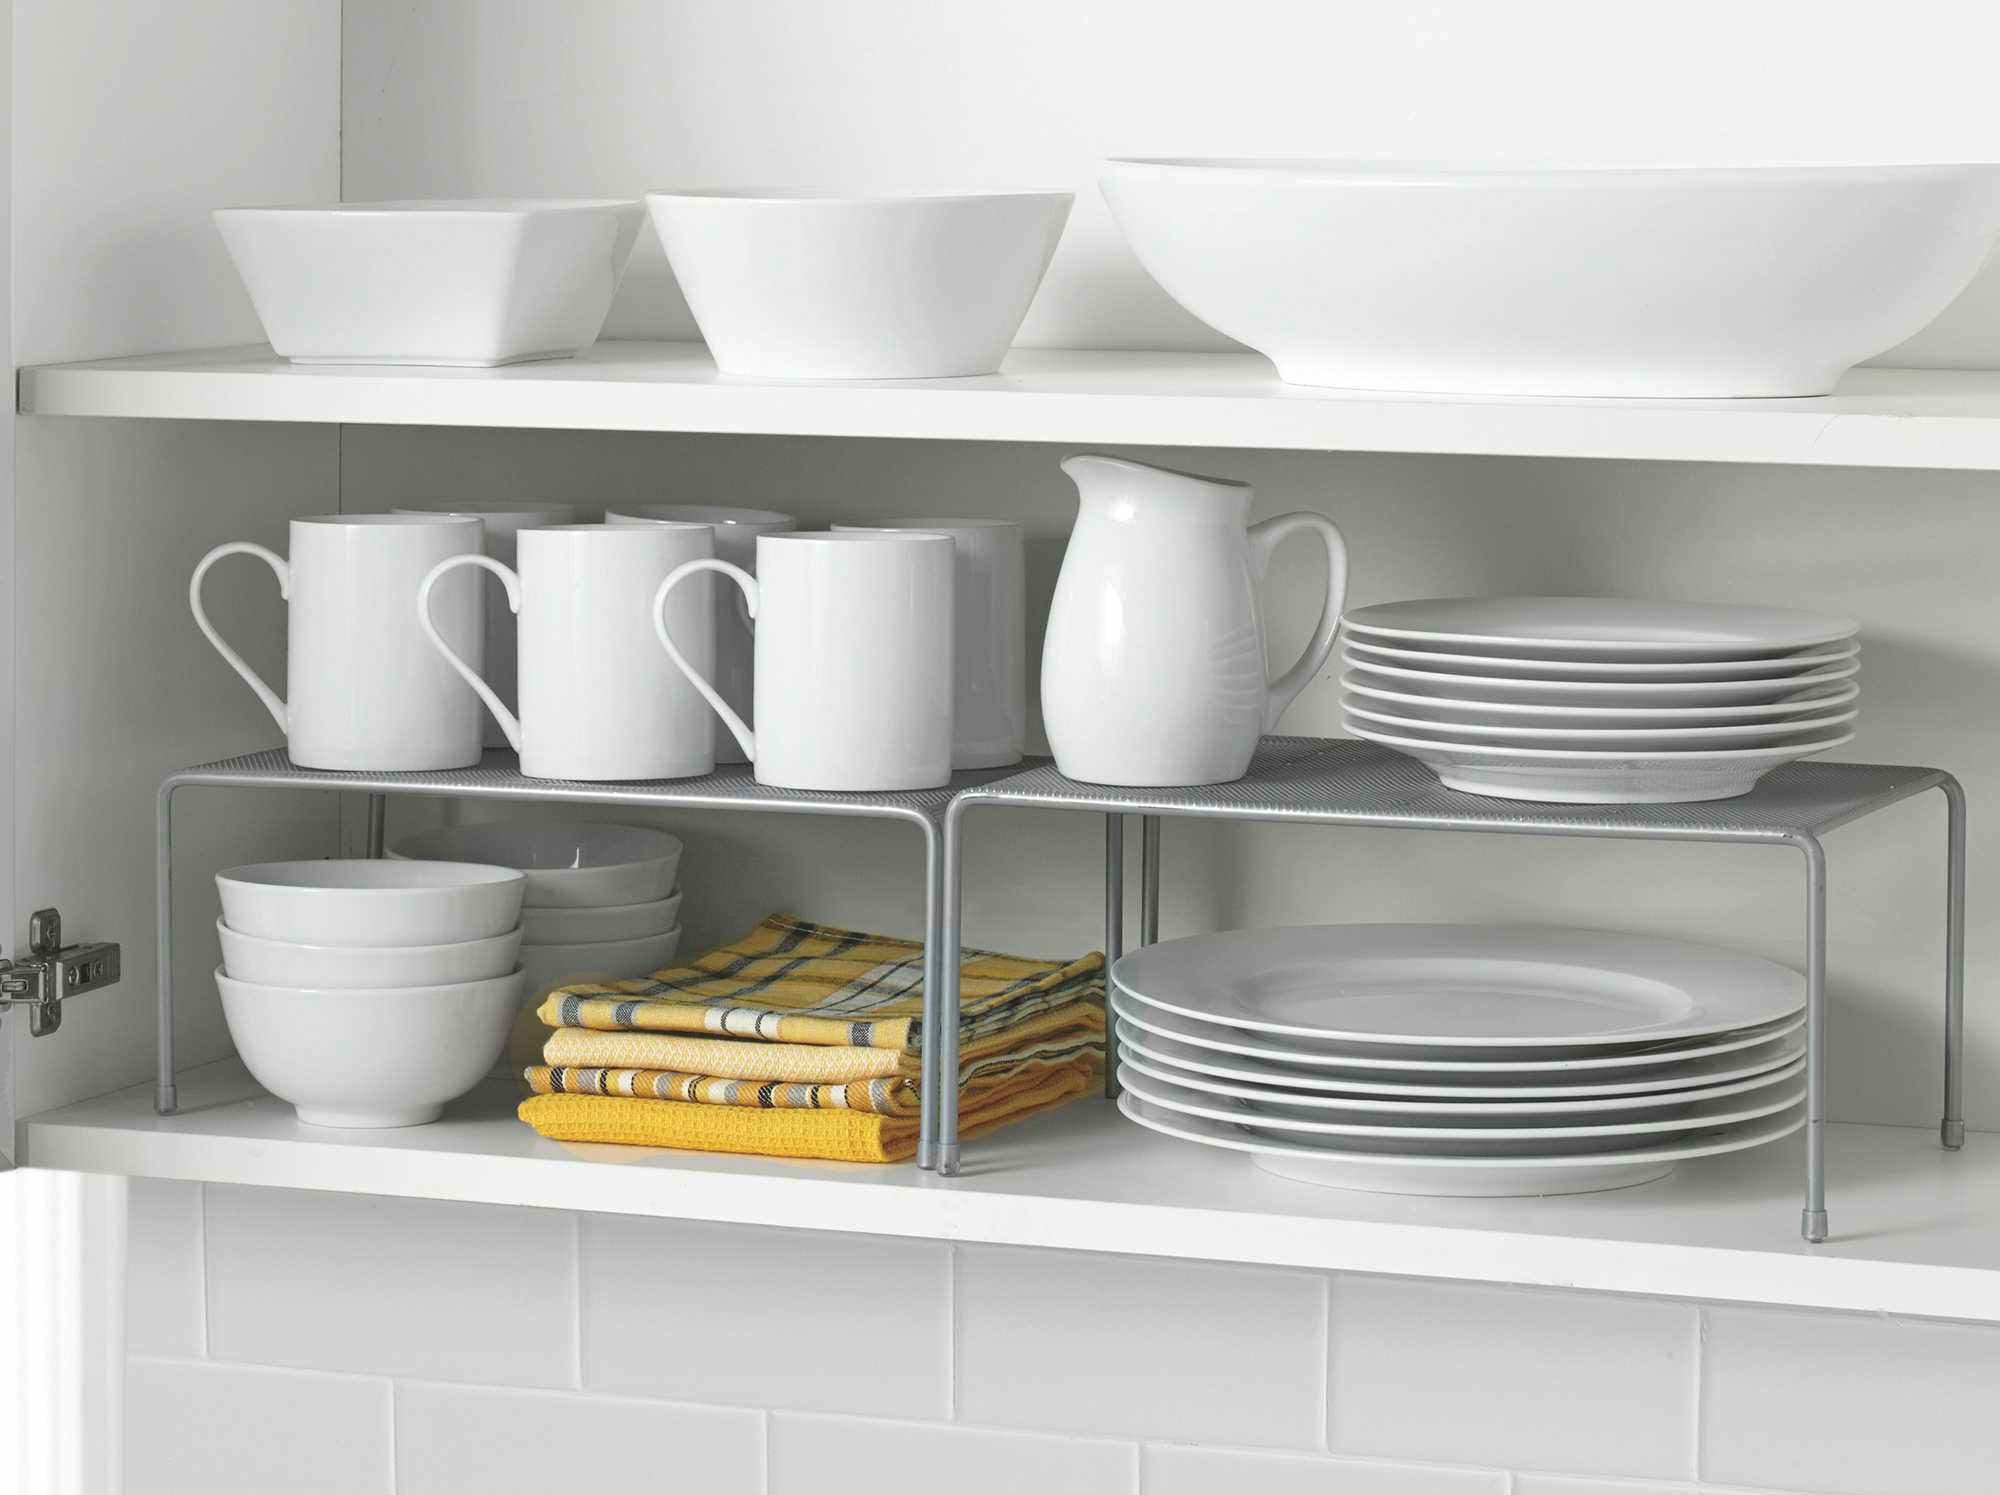 Use mesh shelves inside cabinets for extra storage.